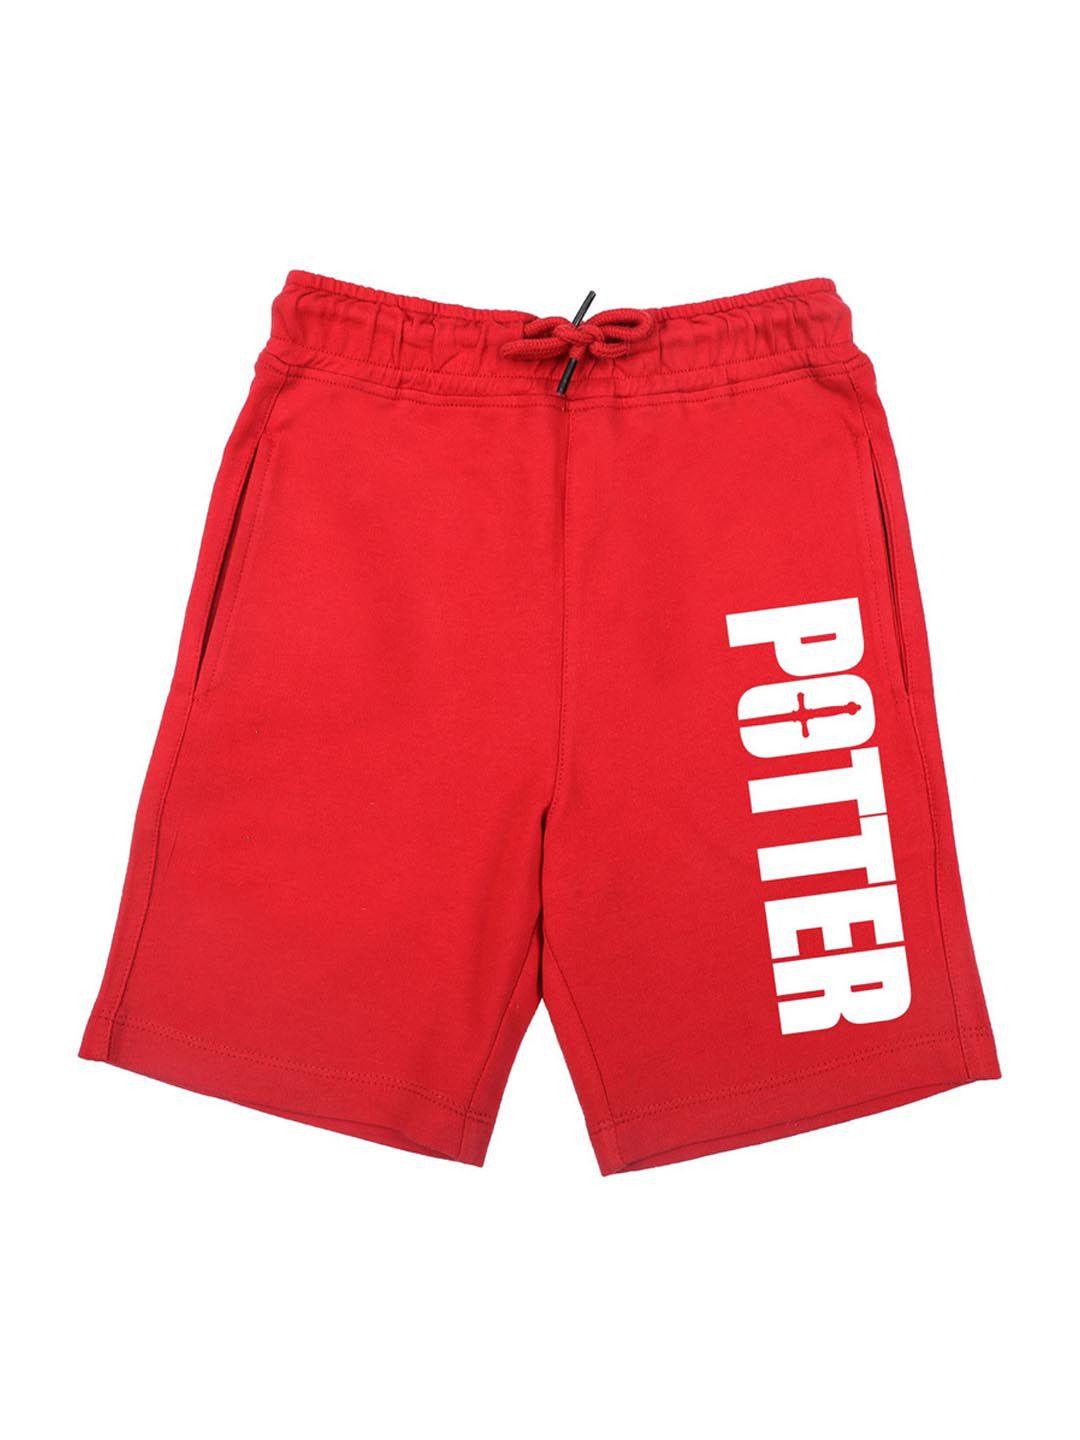 harry-potter-by-wear-your-mind-boys-red-typography-printed-harry-potter-shorts